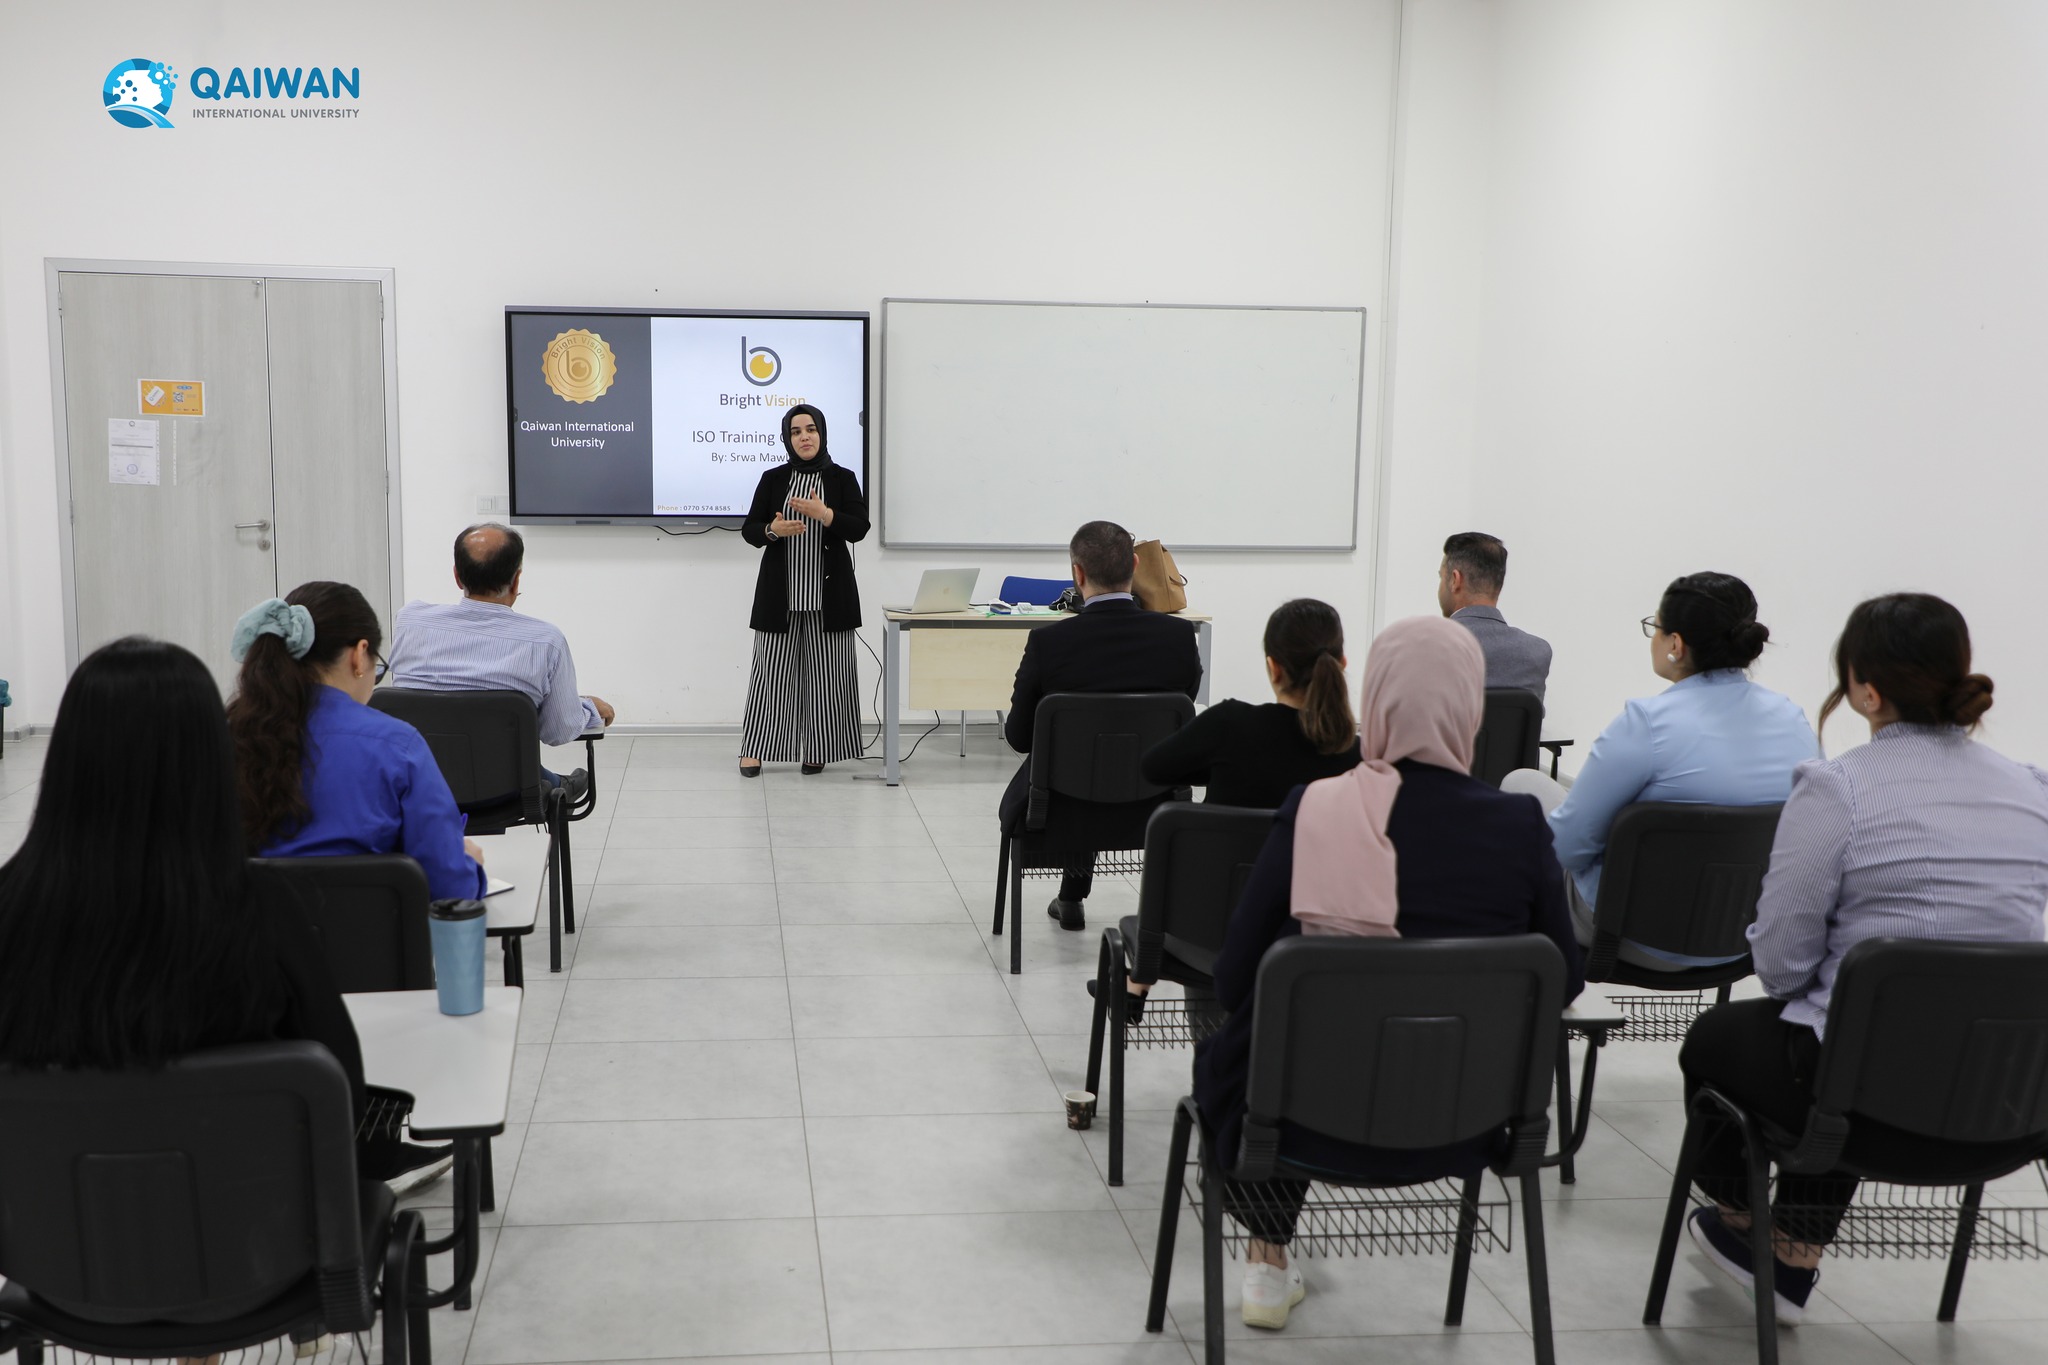 The commencement of a training program intend focusing on contemporary management techniques